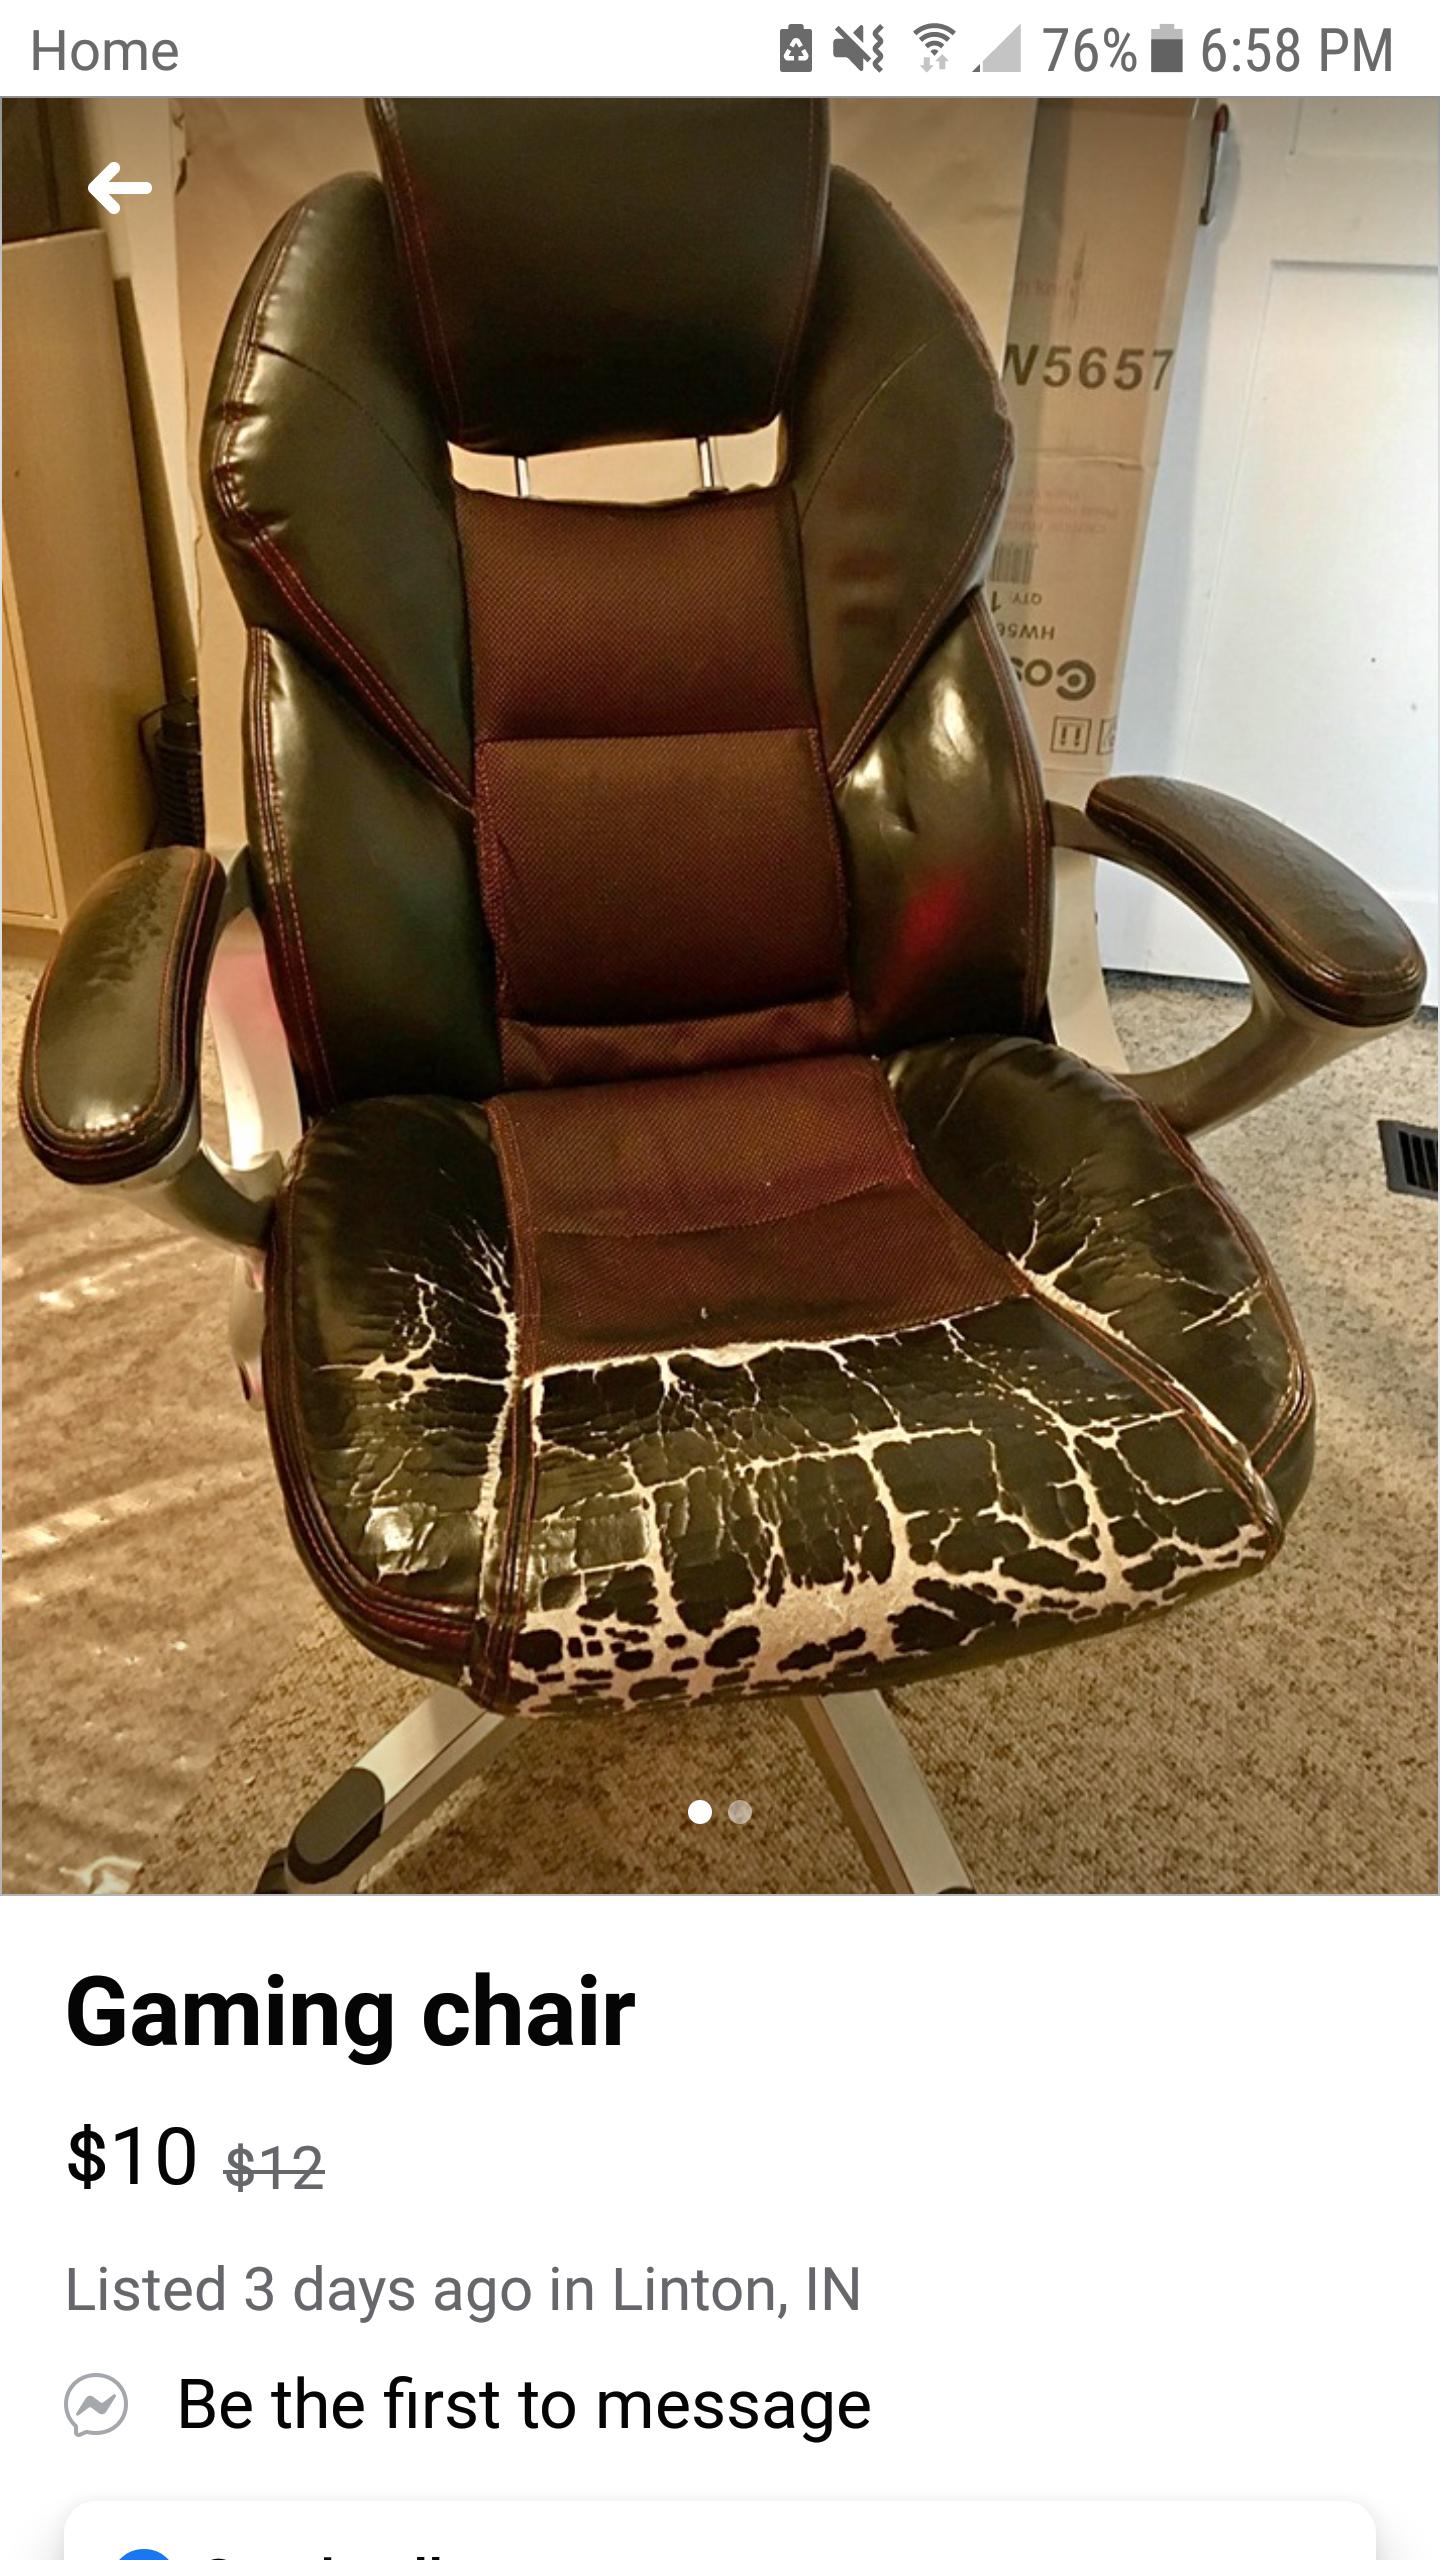 car seat cover - Home & ? 76% i W5657 L 410 Smh og Gaming chair $ 10 $12 Listed 3 days ago in Linton, In Be the first to message